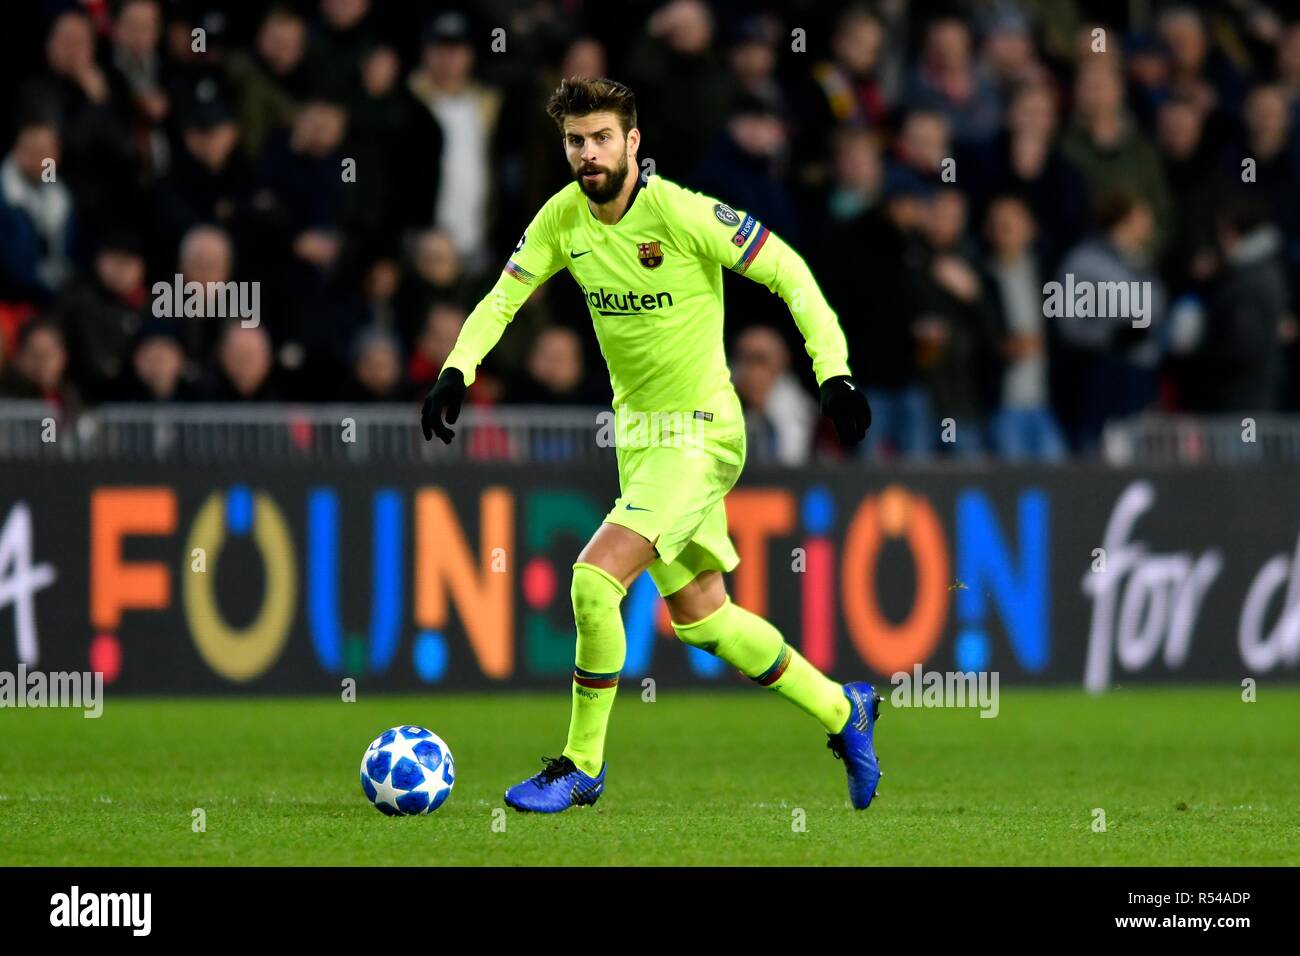 UEFA Champions League 2018-19 - Group B : PSV Eindhoven 1-2 FC Barcelona in  Eindhoven, Holland on November 28, 2018. Gerard Pique Credit: Sander  Chamid/AFLO/Alamy Live News Stock Photo - Alamy